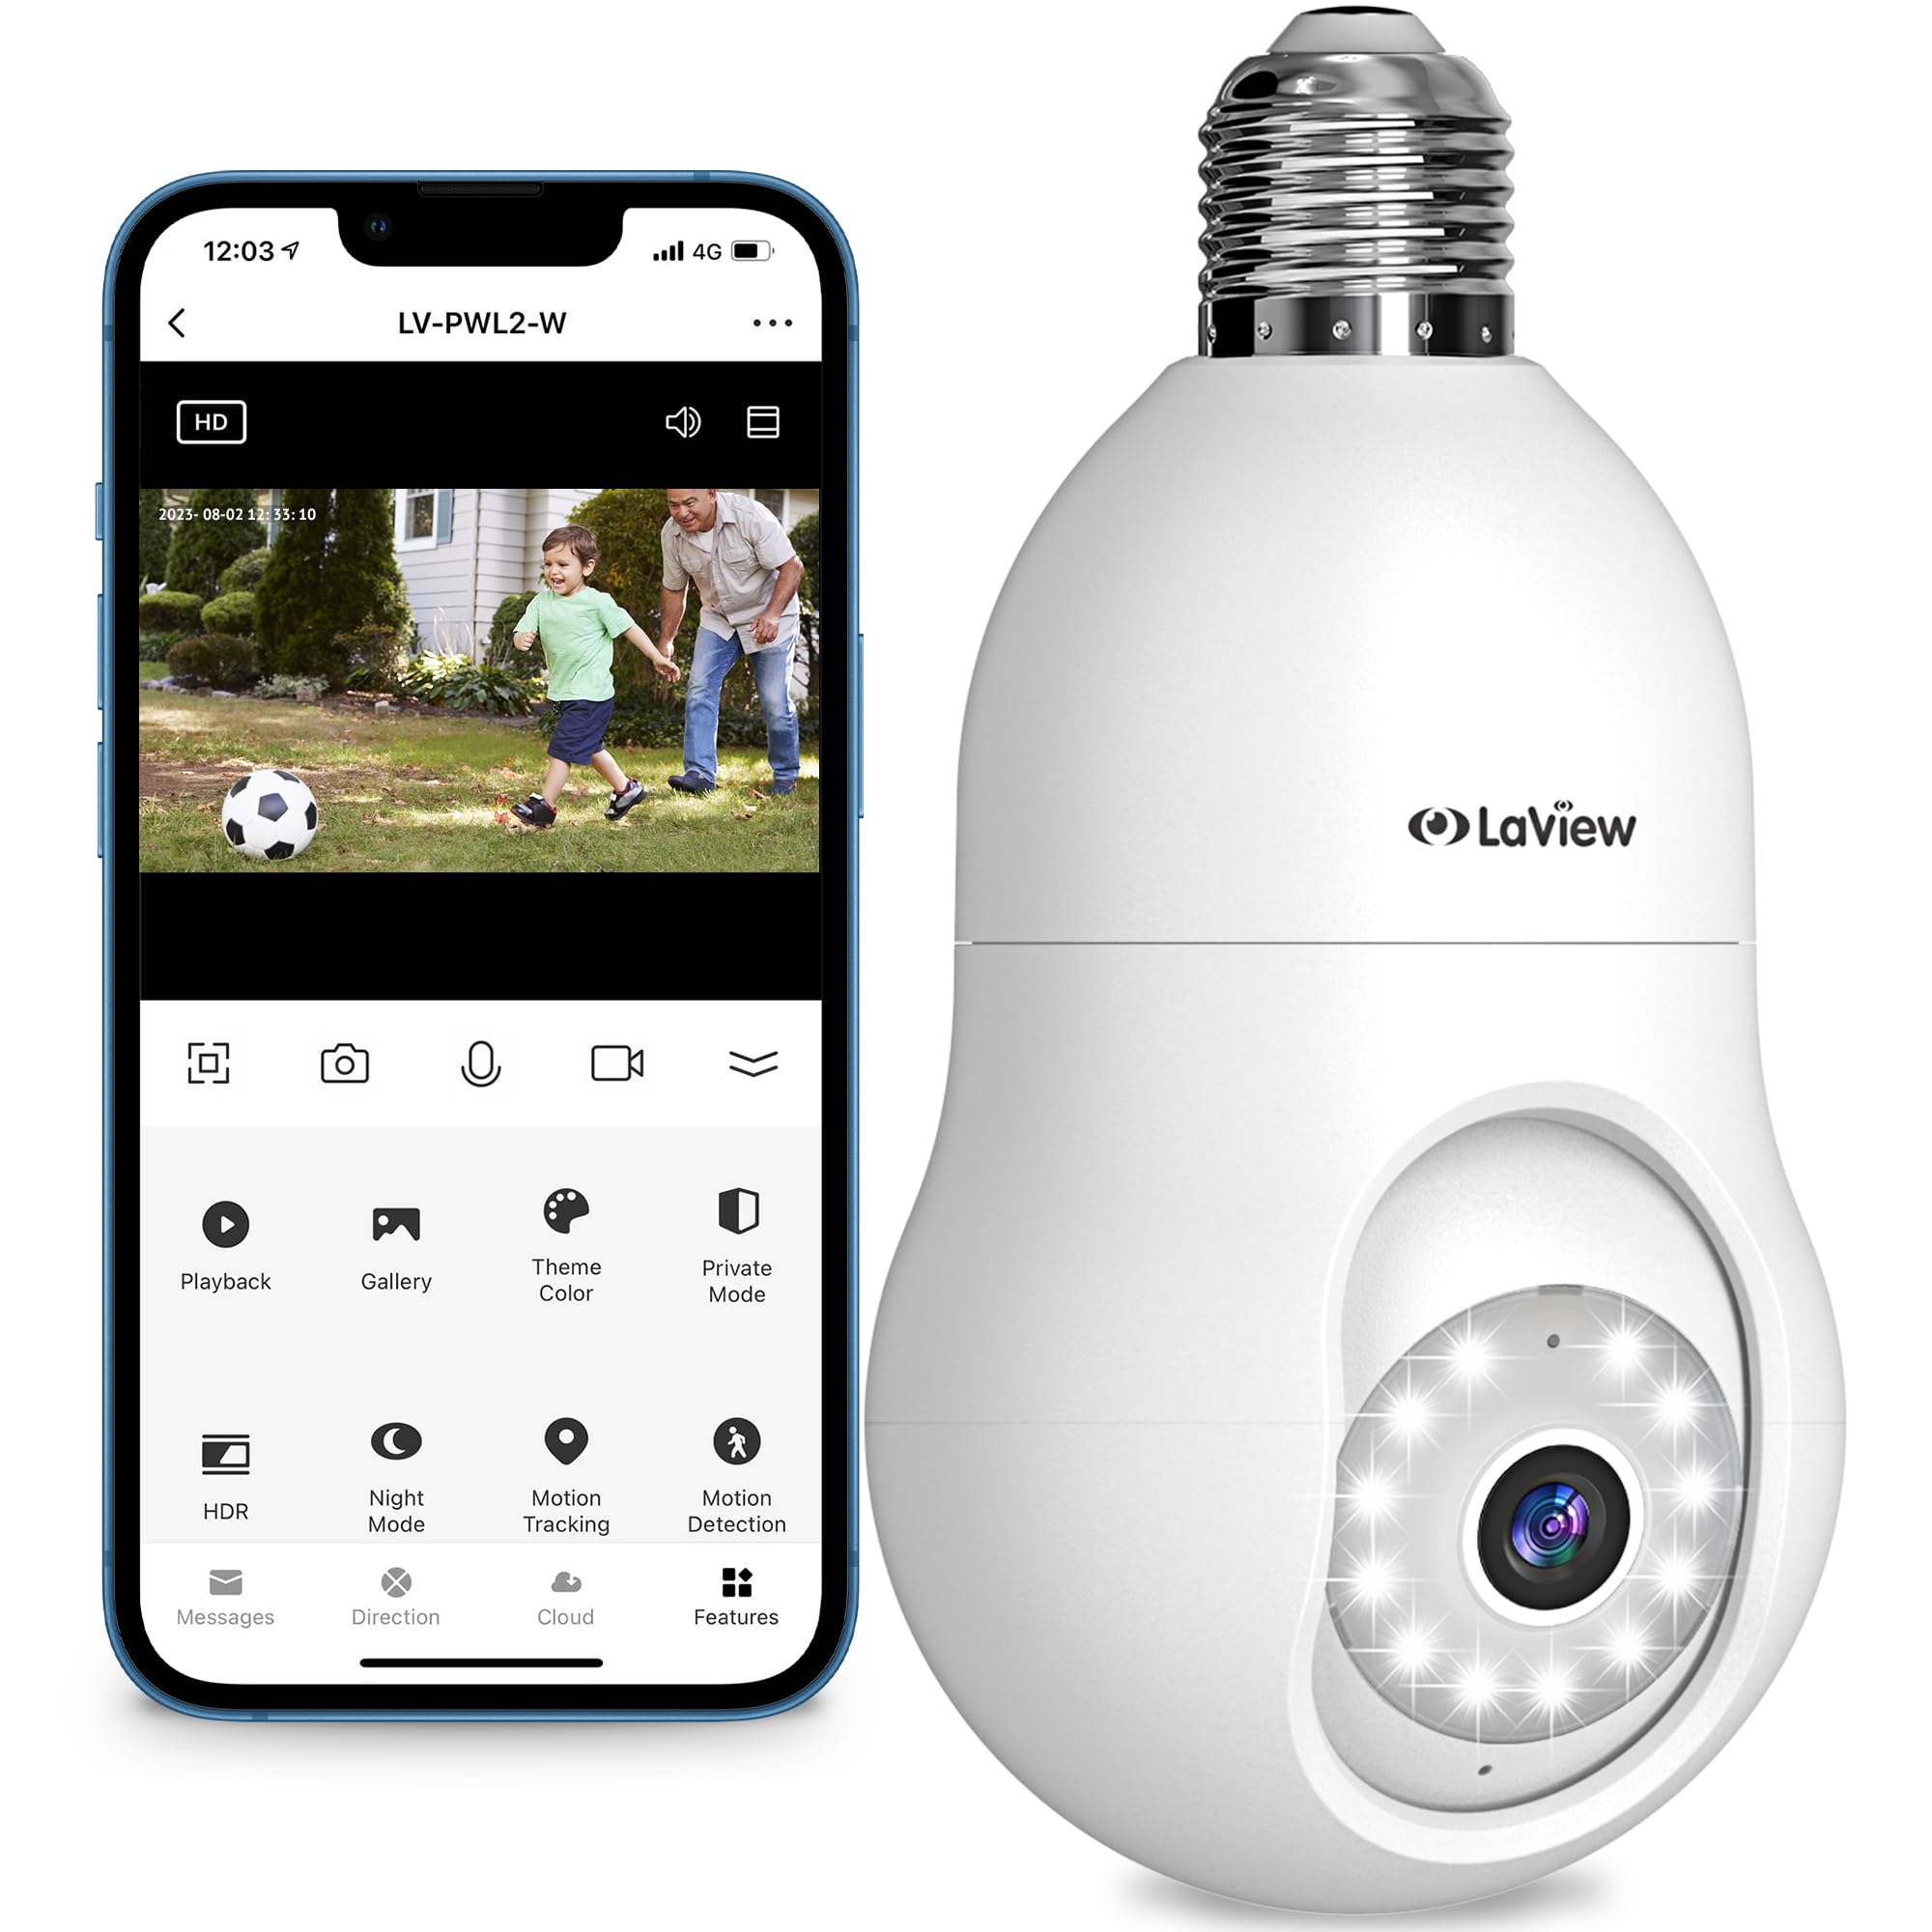 LaView 4MP Bulb Security Camera 2.4GHz,360° 2K Security Camera - $28.79